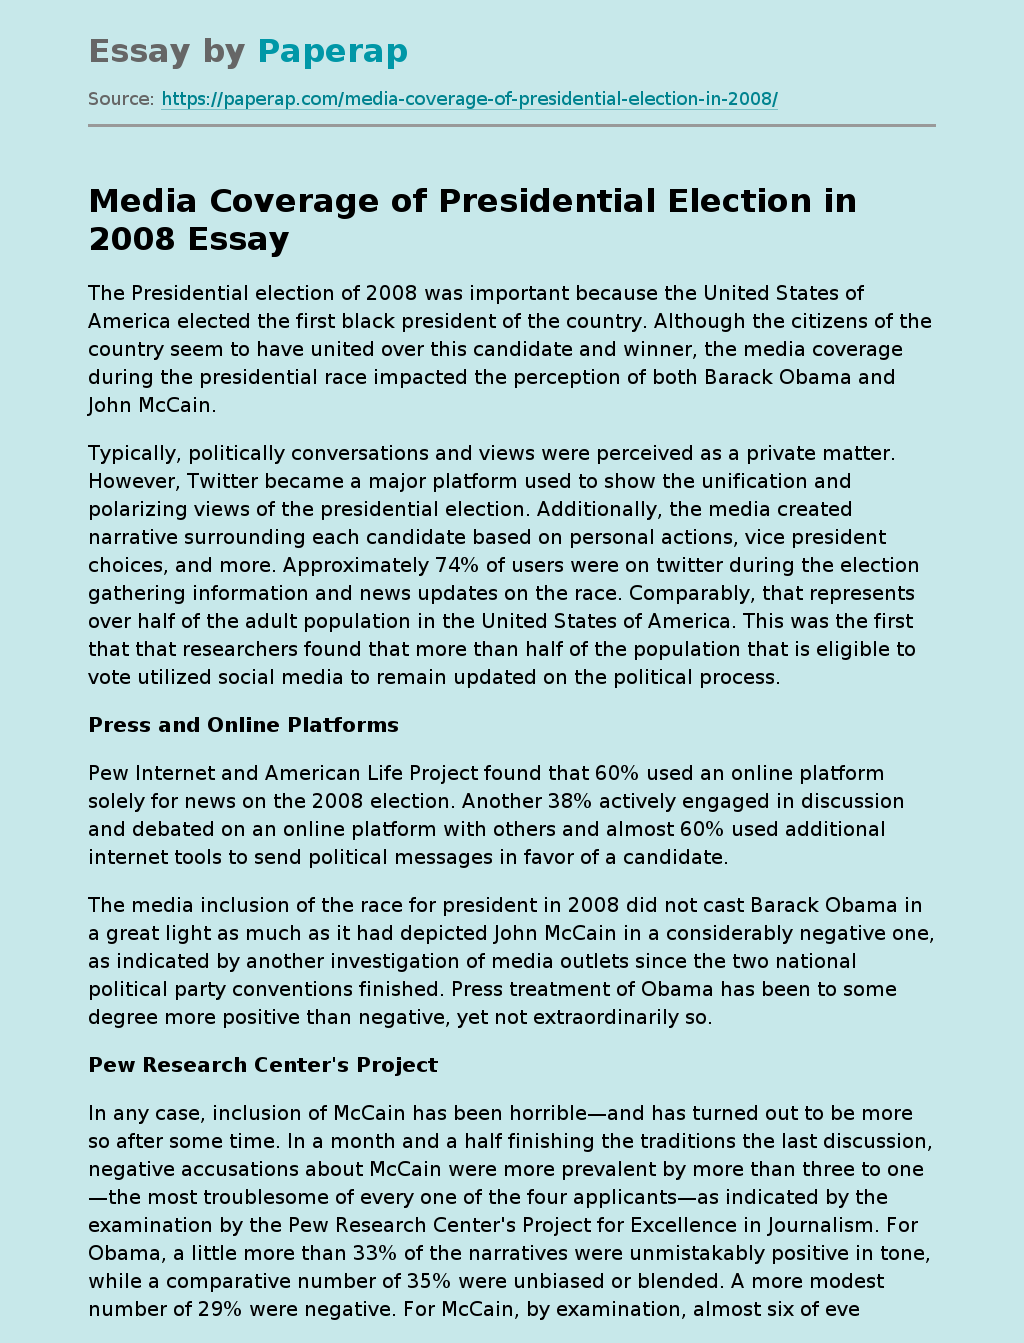 Media Coverage of Presidential Election in 2008